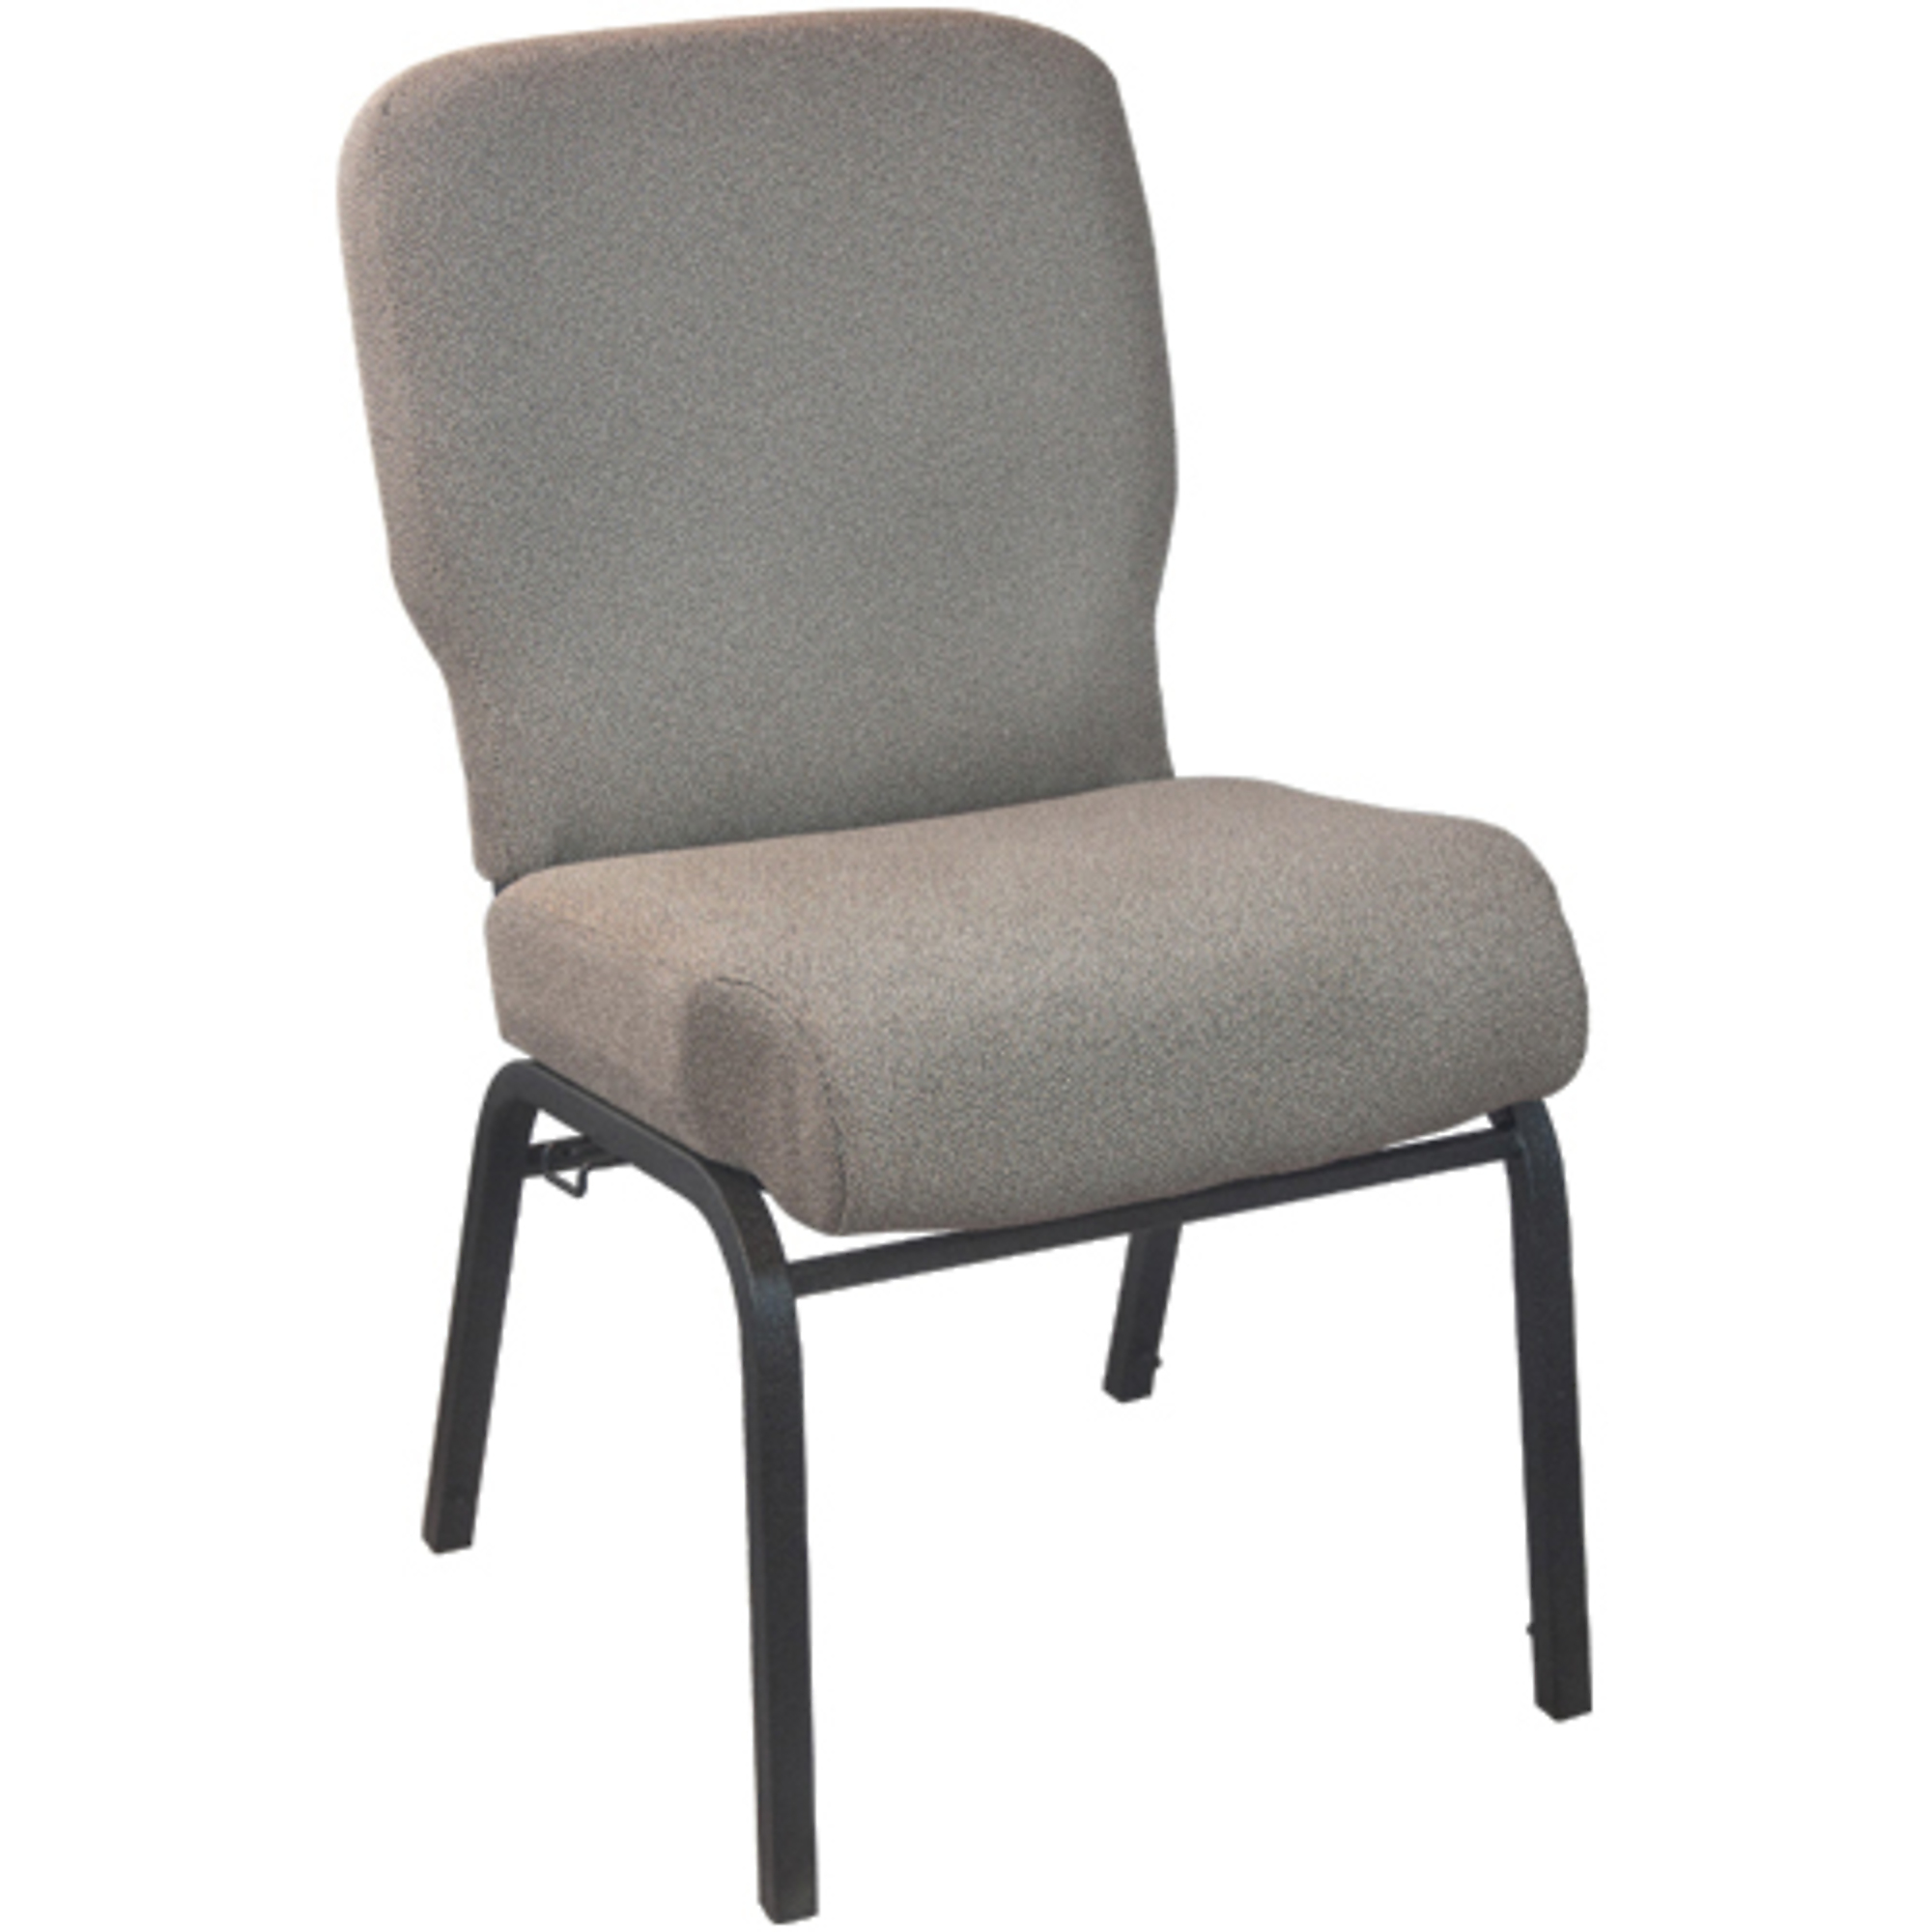 Flash Furniture, Tan Speckle Church Chair - 20Inch Wide, Primary Color Beige, Included (qty.) 1, Model PCRCB122